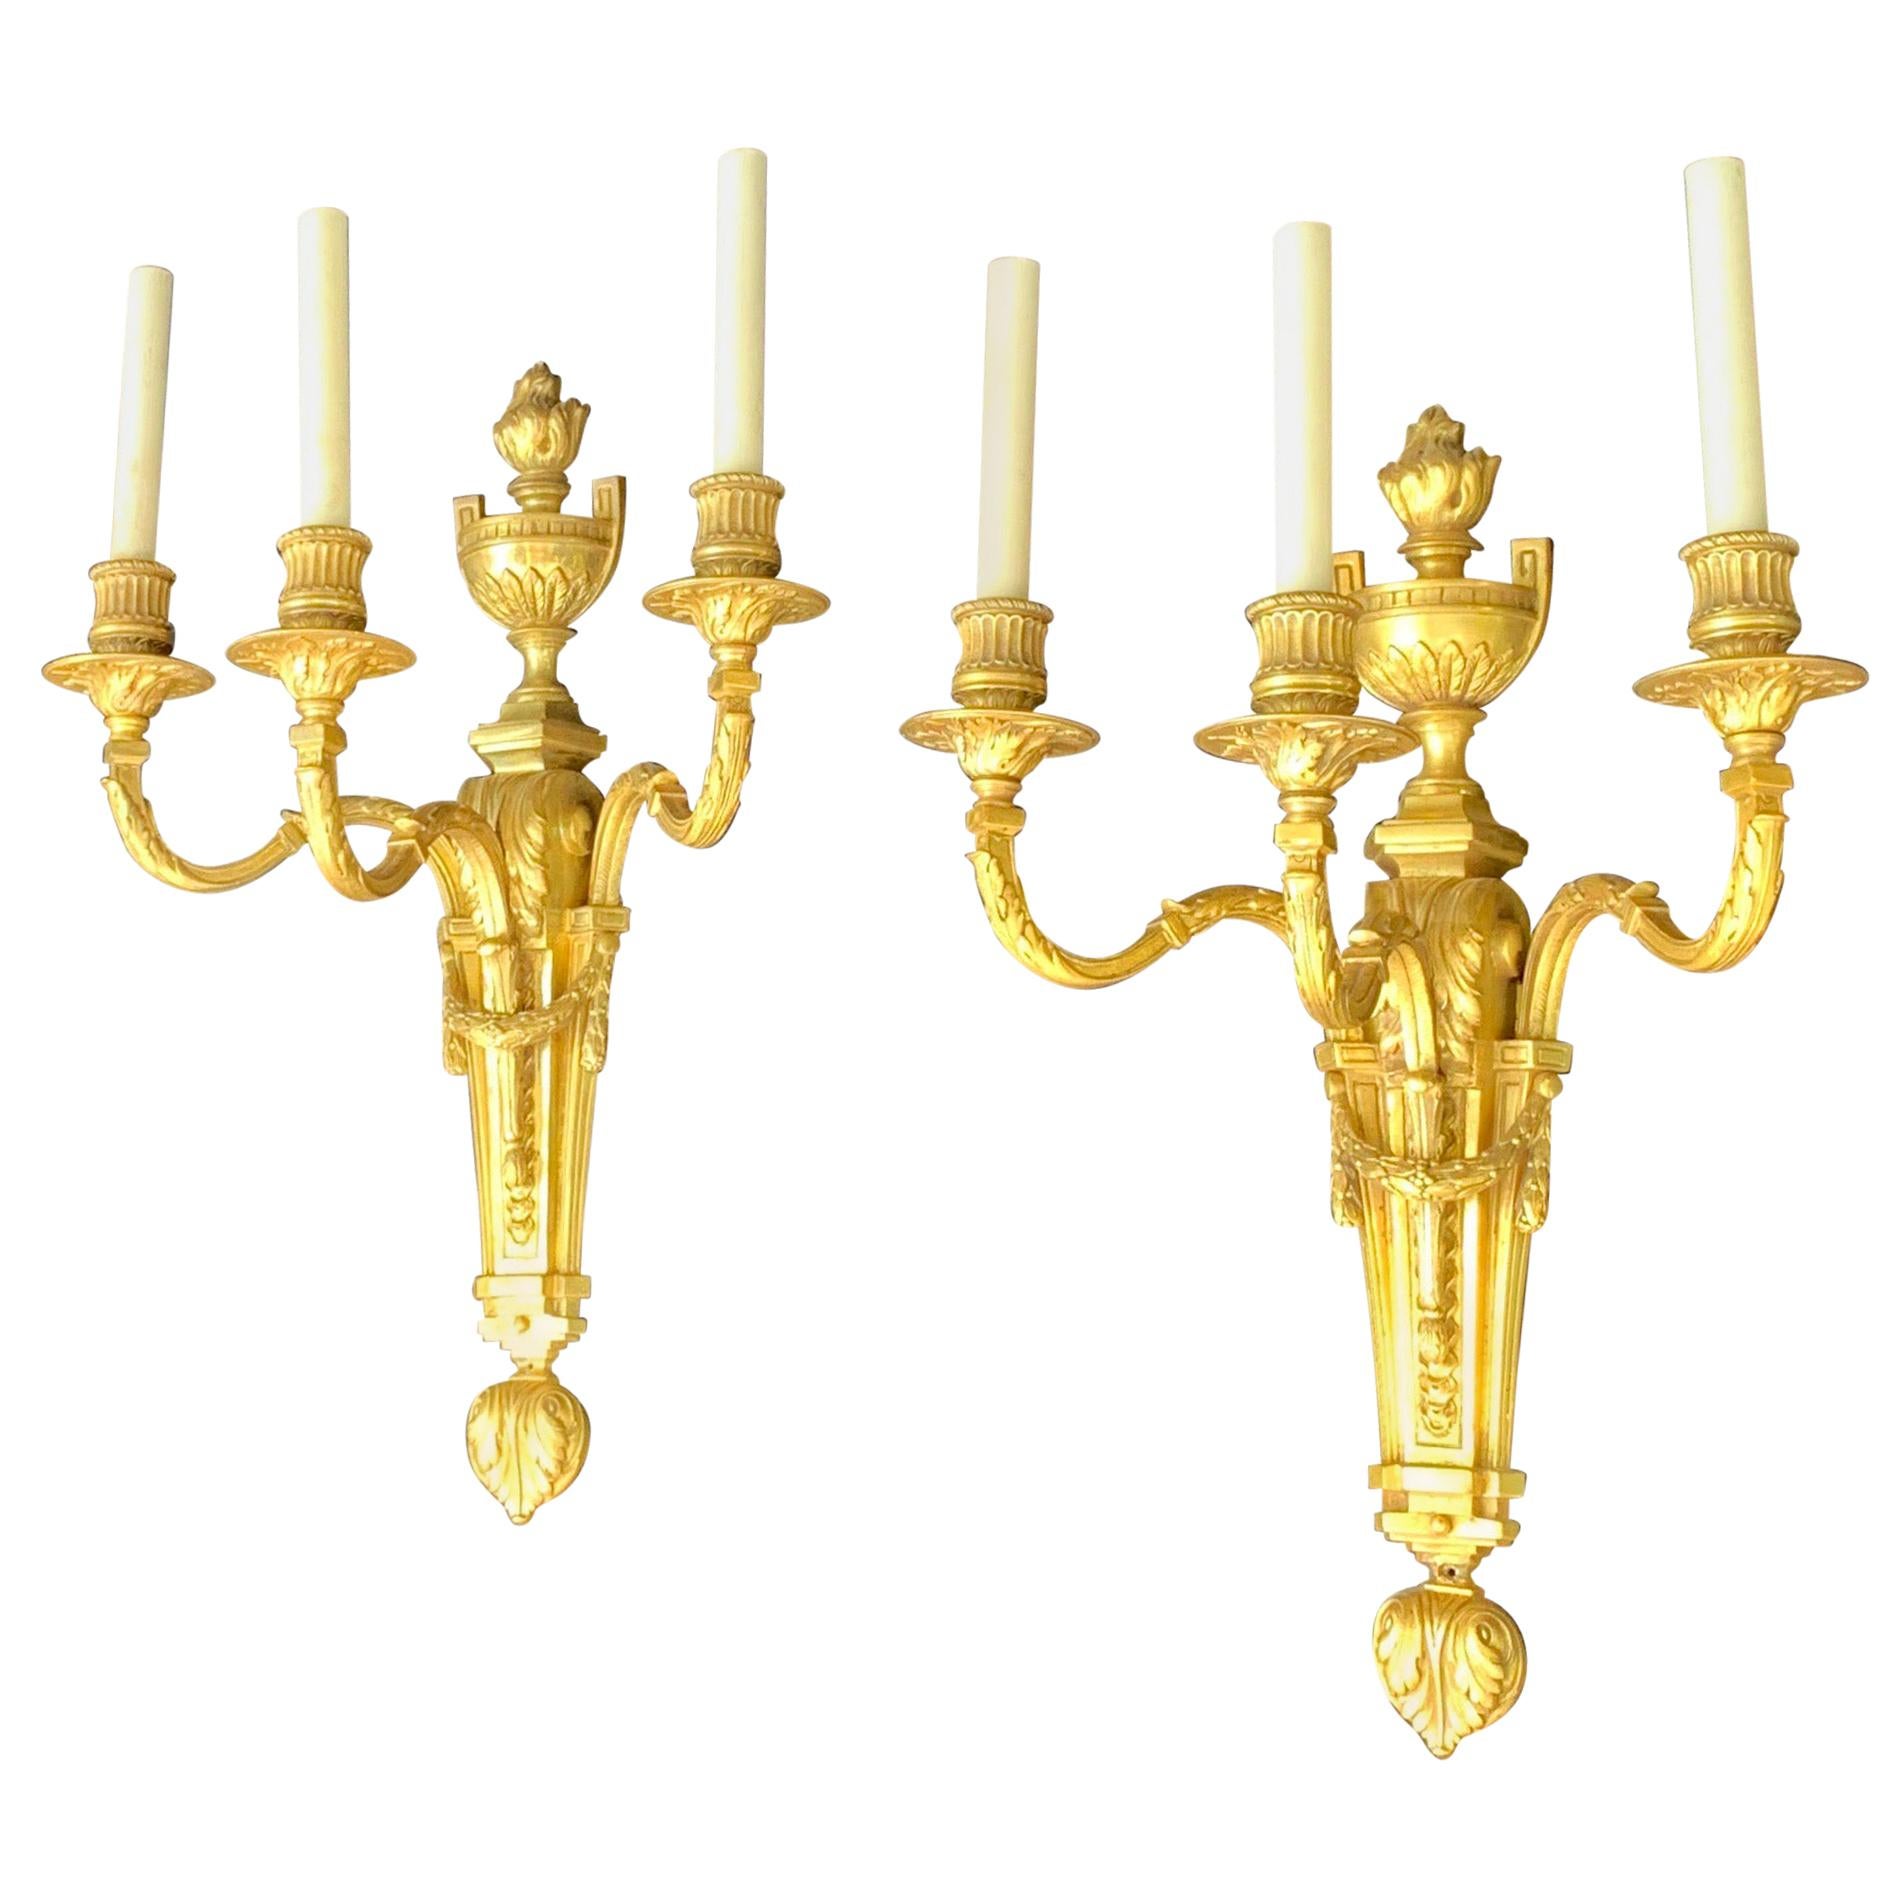 Wonderful Large Pair of French Urn Garland Neoclassical Bronze Caldwell Sconces